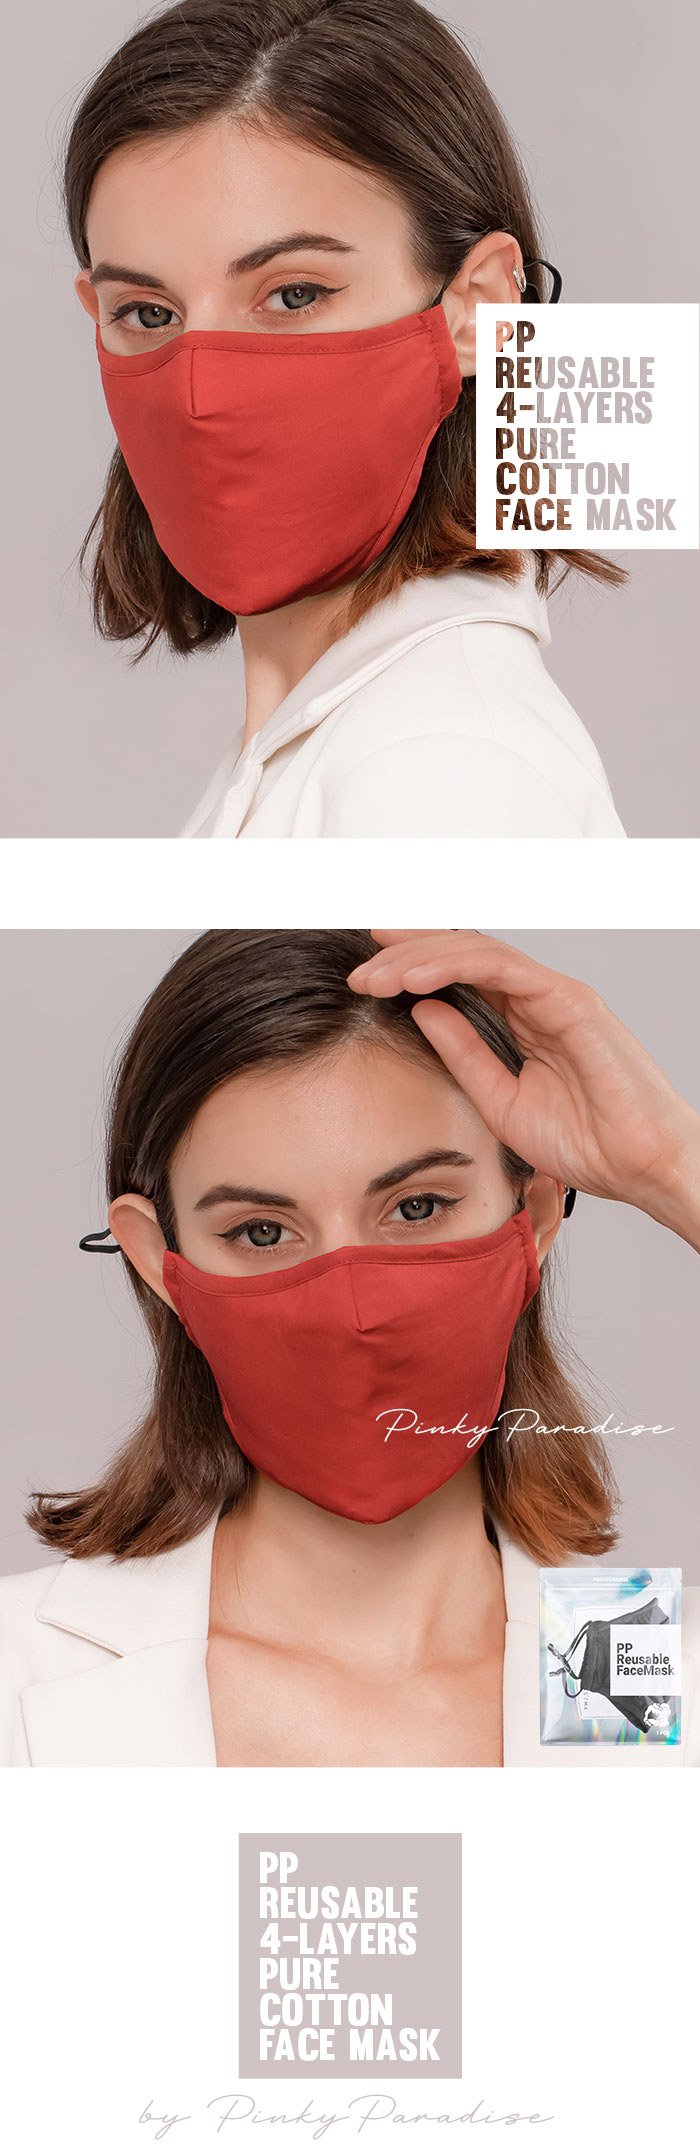 PP Reusable 4 layers Pure Cotton Face Mask in red color